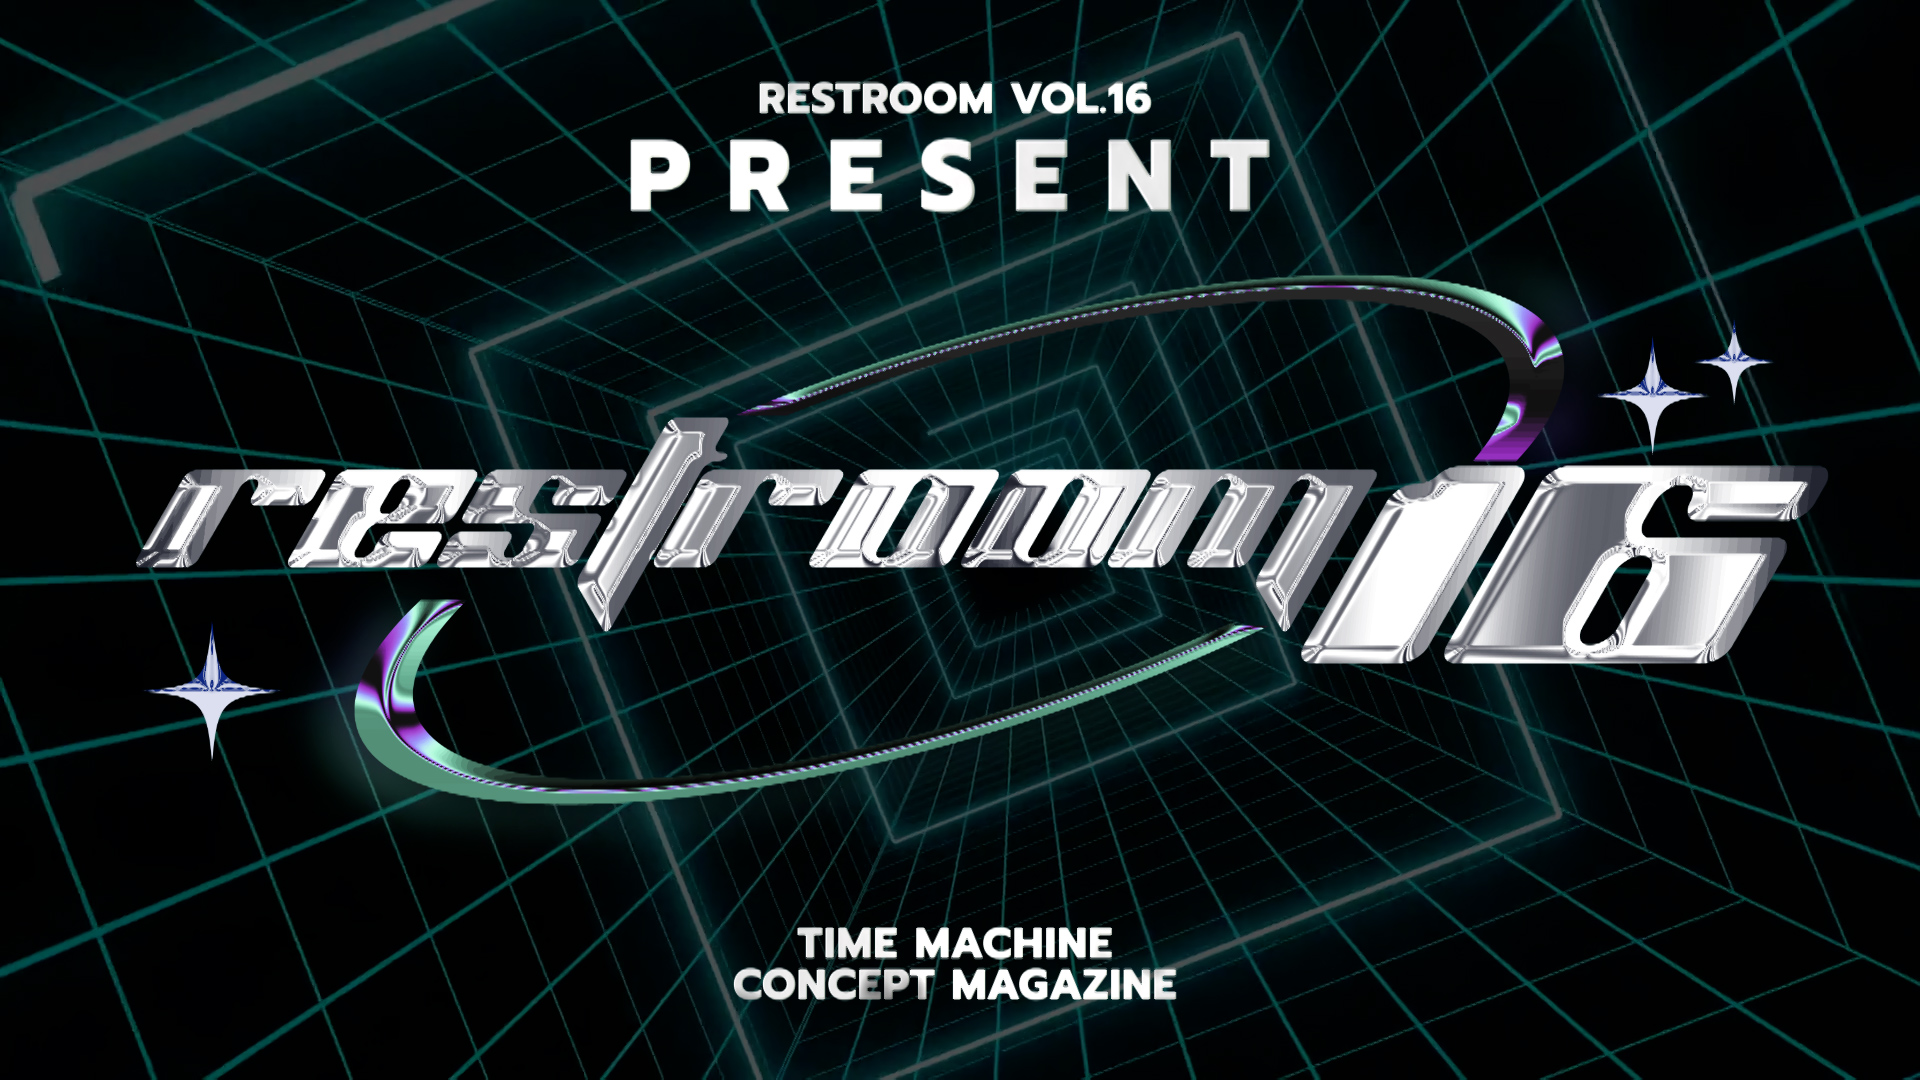 「VTR#3」from RESTROOM MAGAZINE "Time Machine (Y2K, BARBIE, SPACE) - Concept Magazine"